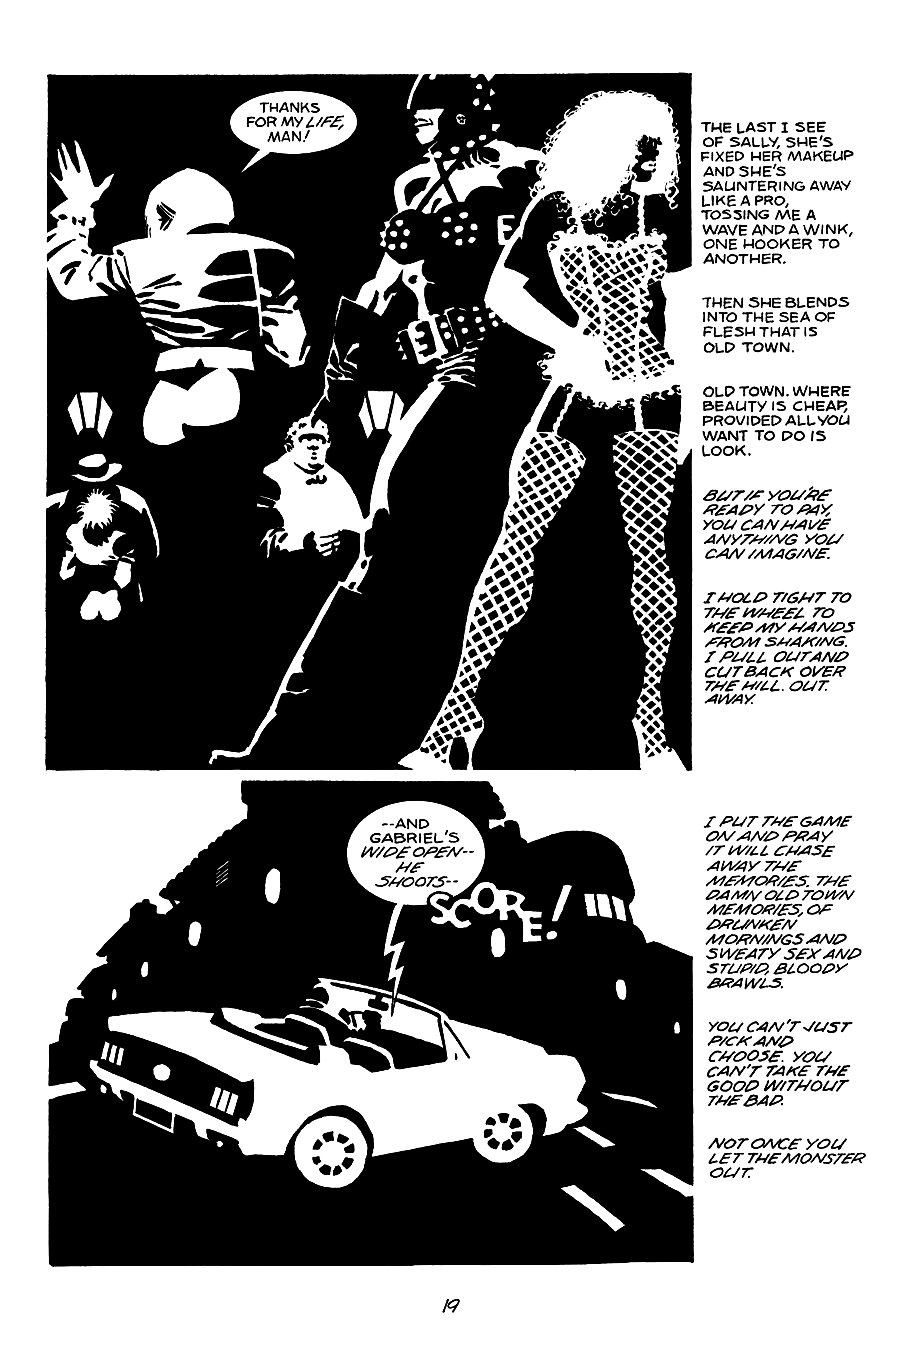 page 19 of sin city 2 the hard goodbye